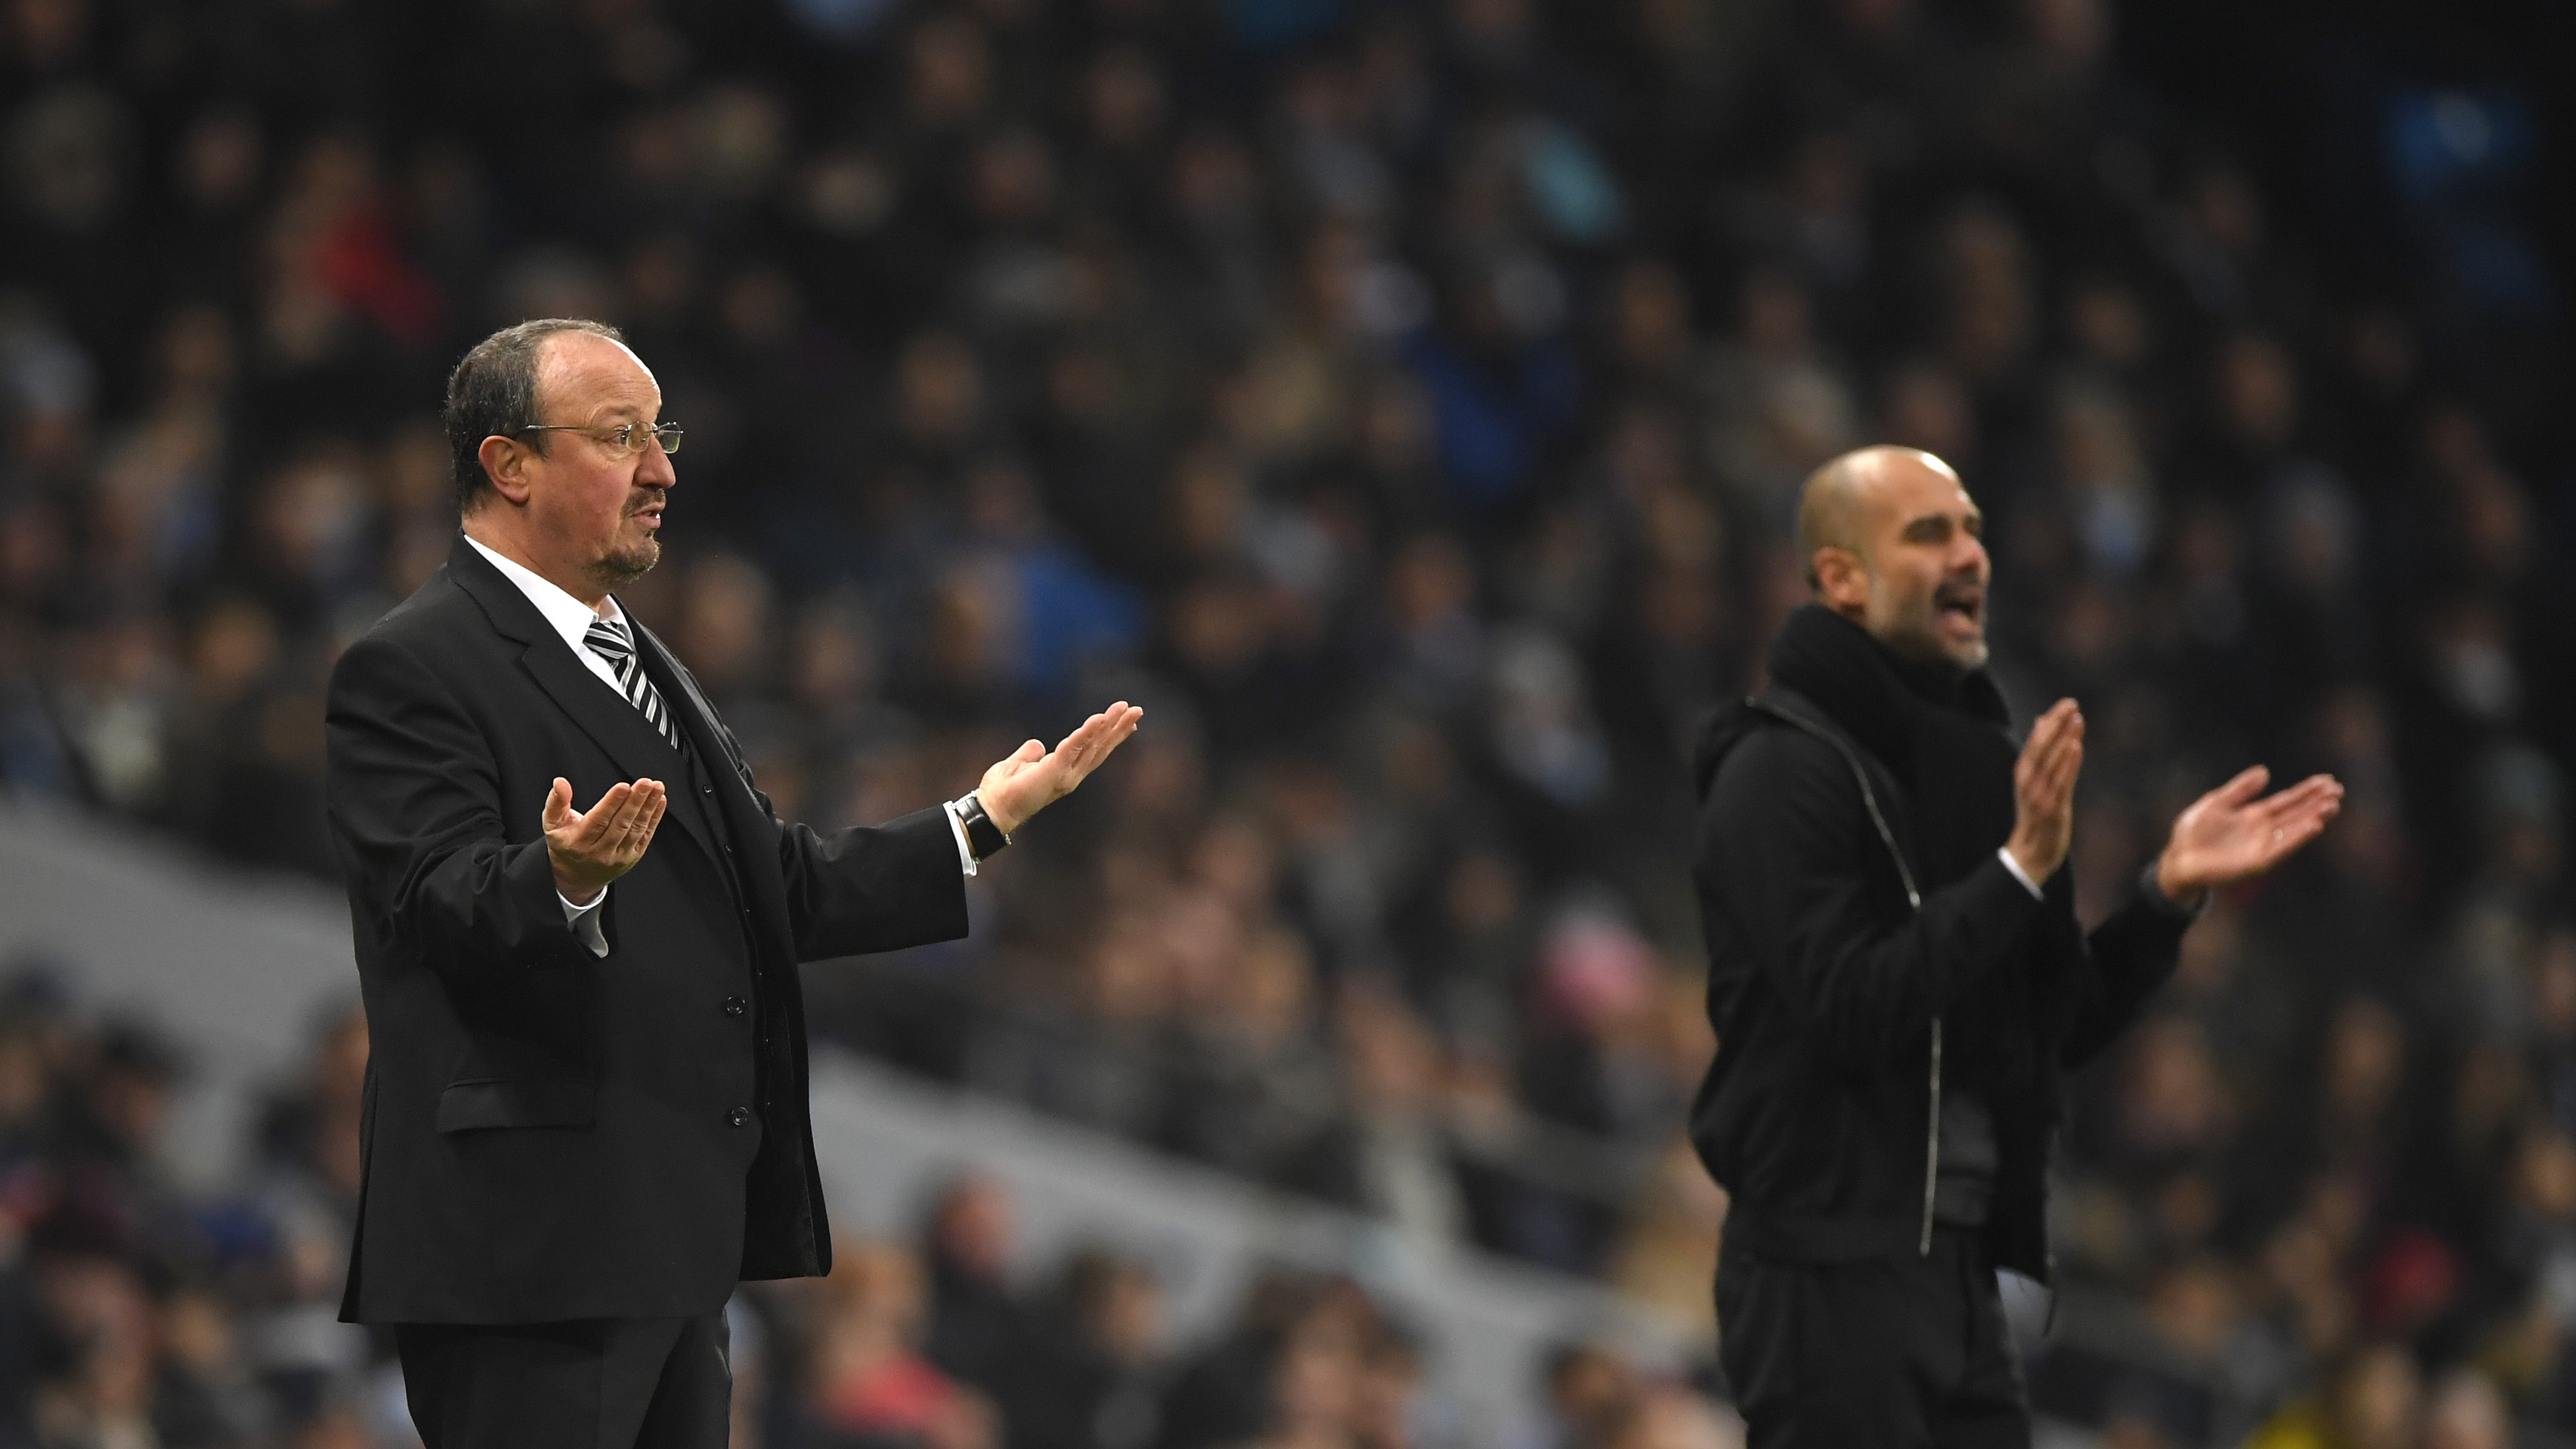 MANCHESTER, ENGLAND - JANUARY 20: Rafael Benitez, Manager of Newcastle United and Josep Guardiola, Manager of Manchester City react during the Premier League match between Manchester City and Newcastle United at Etihad Stadium on January 20, 2018 in Manchester, England.  (Photo by Stu Forster/Getty Images)